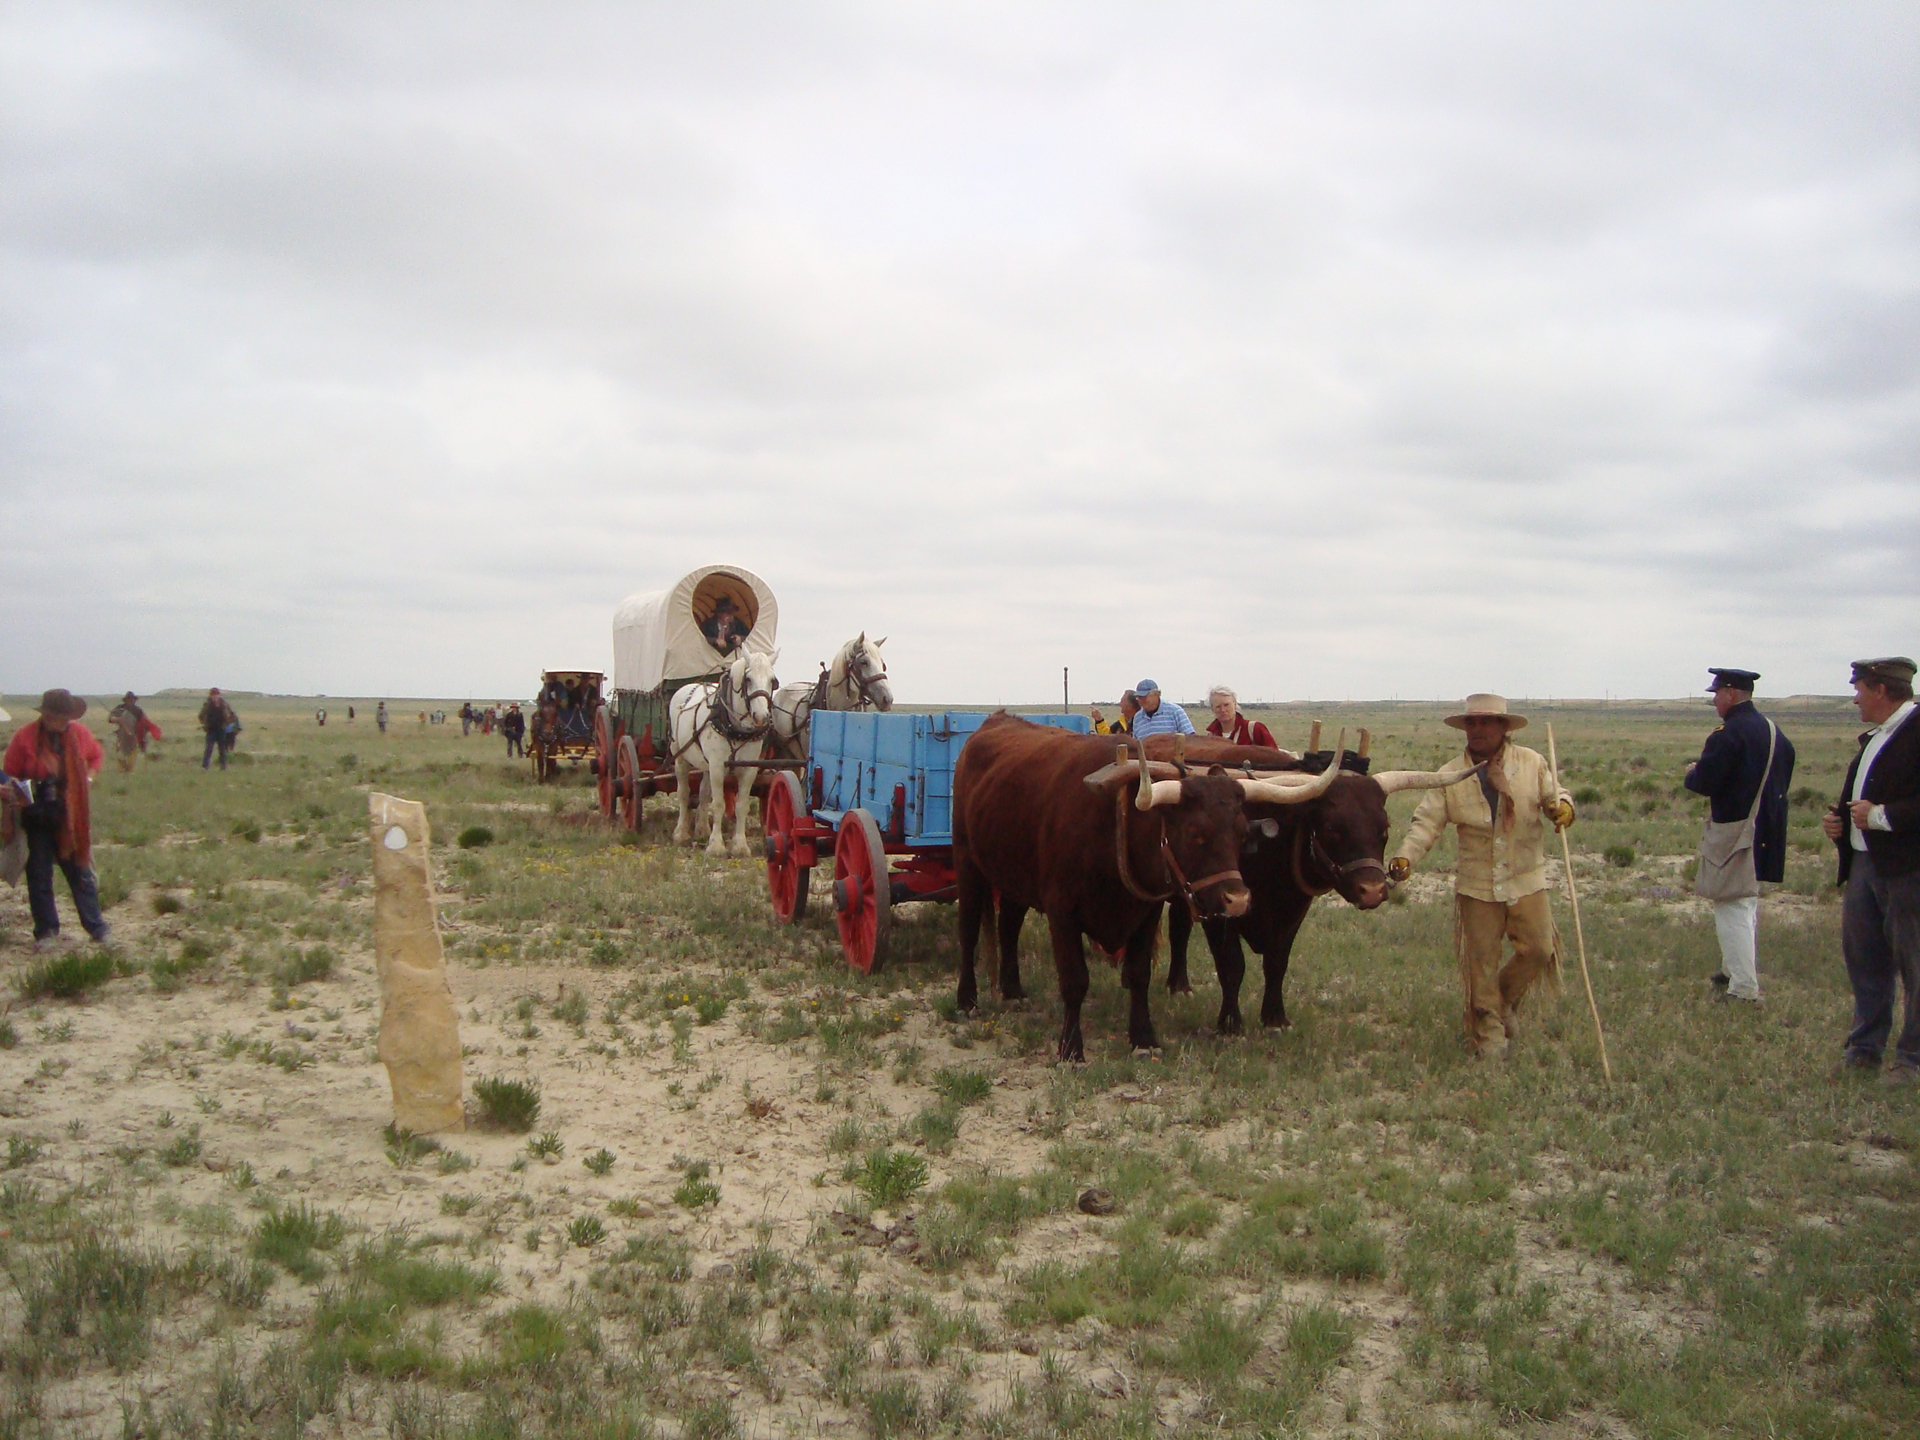 emigrant wagons pulled by oxen and horses cross the prairie with people walking alongside